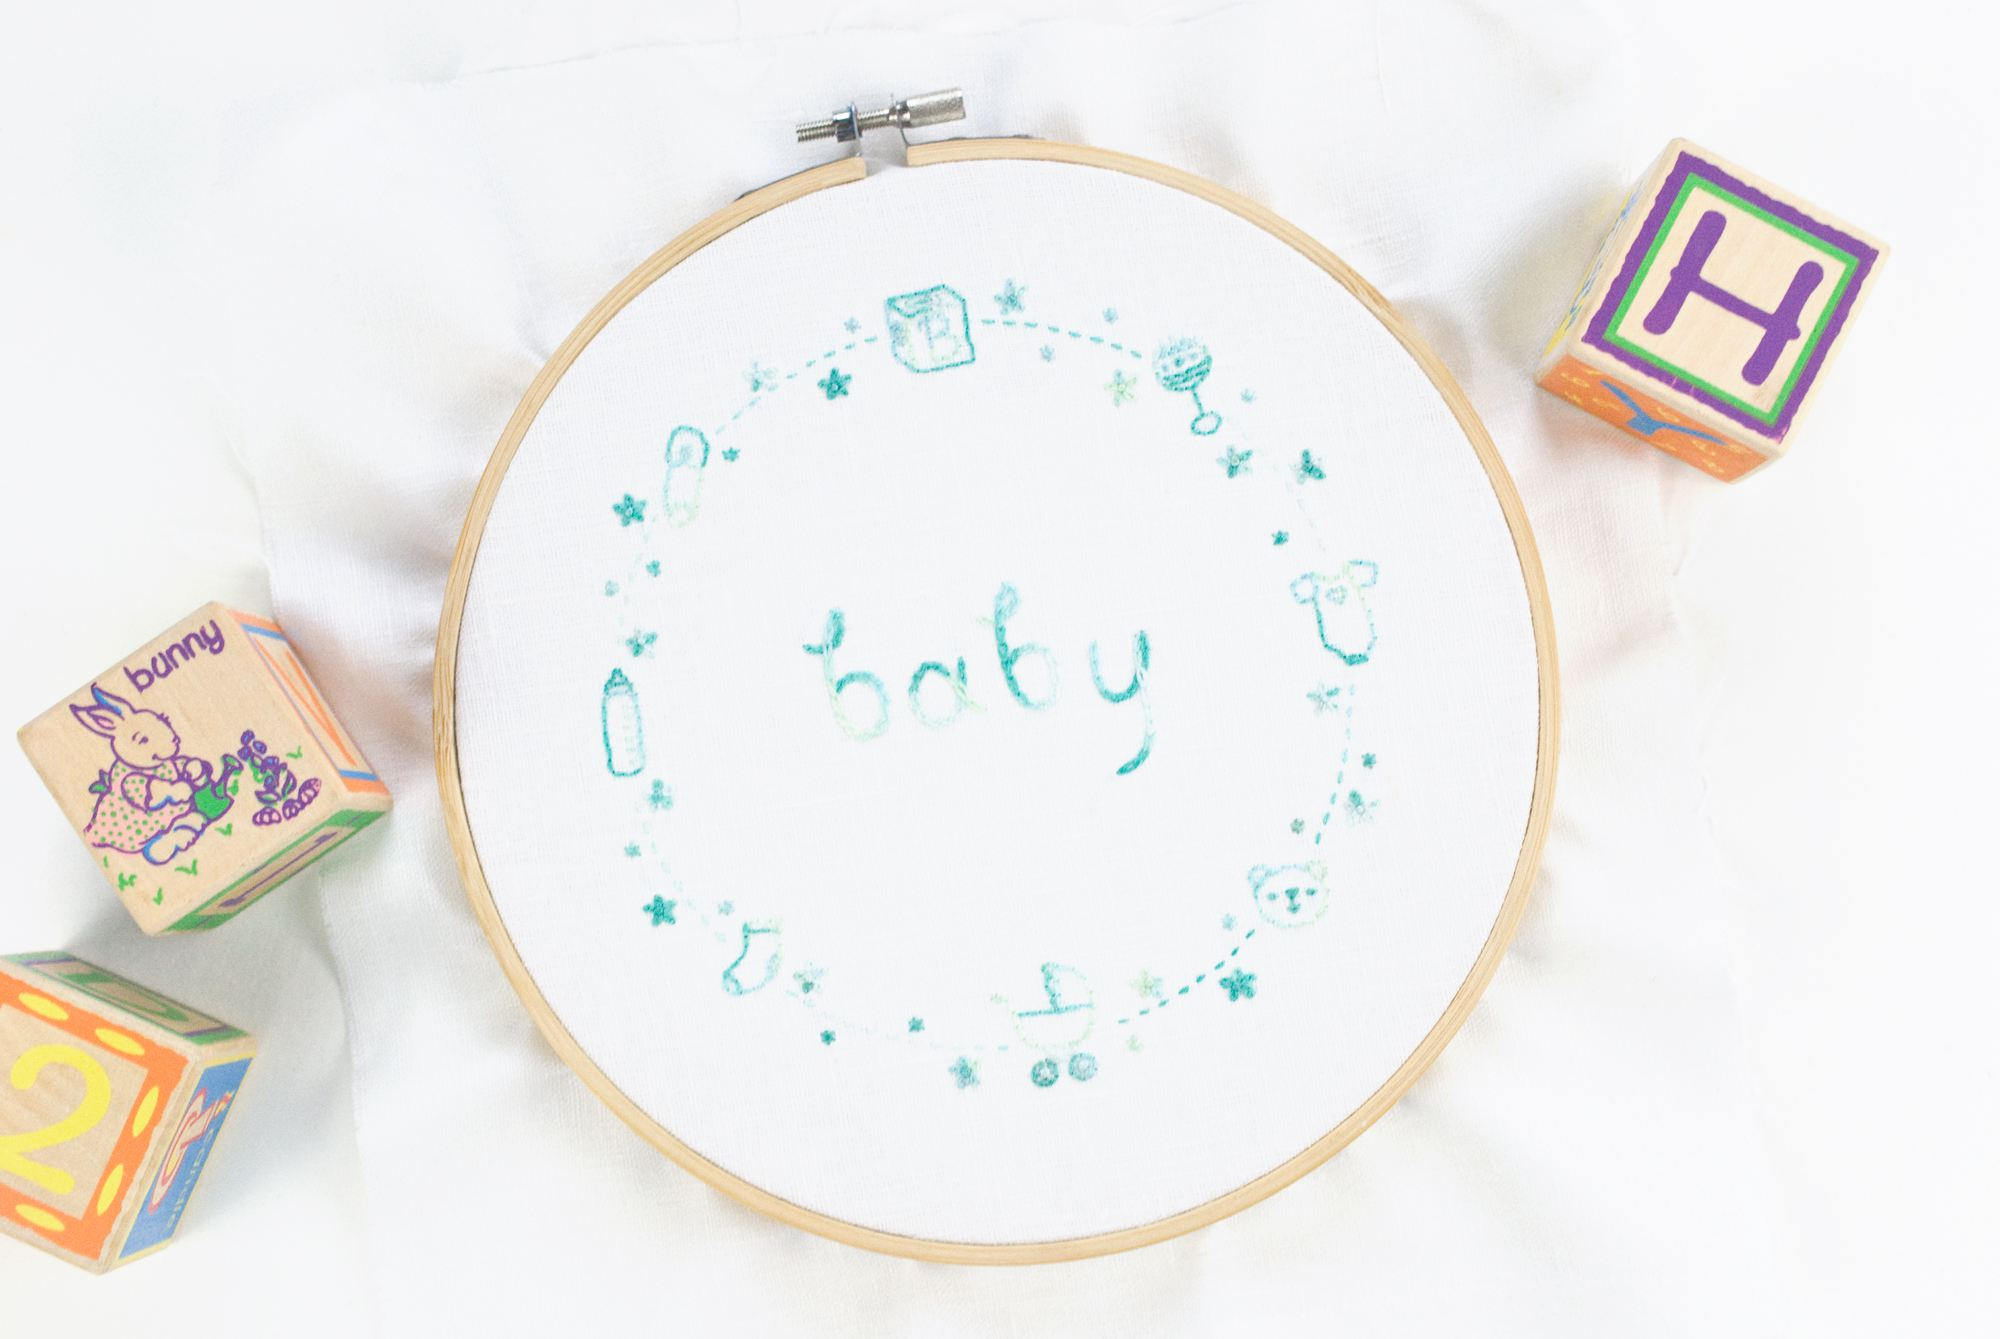 How To Create Embroidery Patterns Our Top 25 Free Embroidery Designs